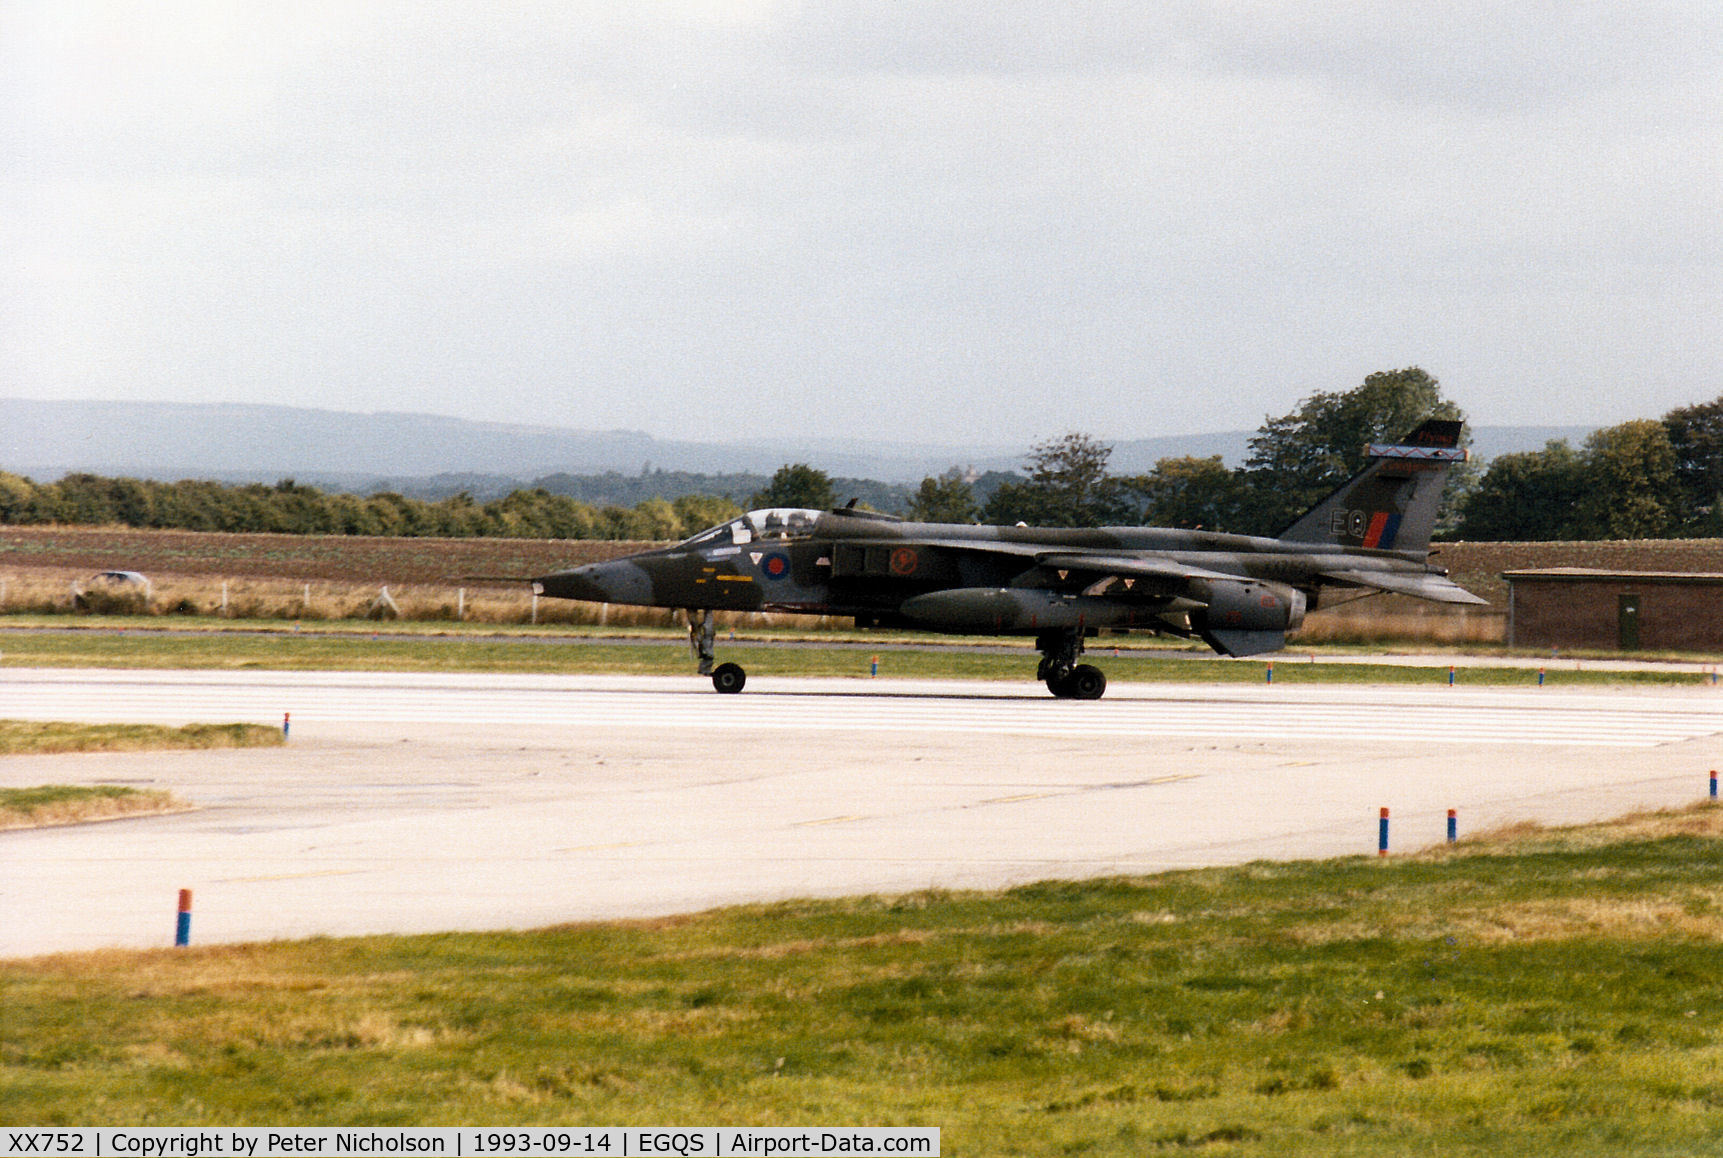 XX752, 1975 Sepecat Jaguar GR.1A C/N S.49, Jaguar GR.1A of 6 Squadron at RAF Coltishall preparing for take-off on Runway 05 at RAF Lossiemouth in September 1993